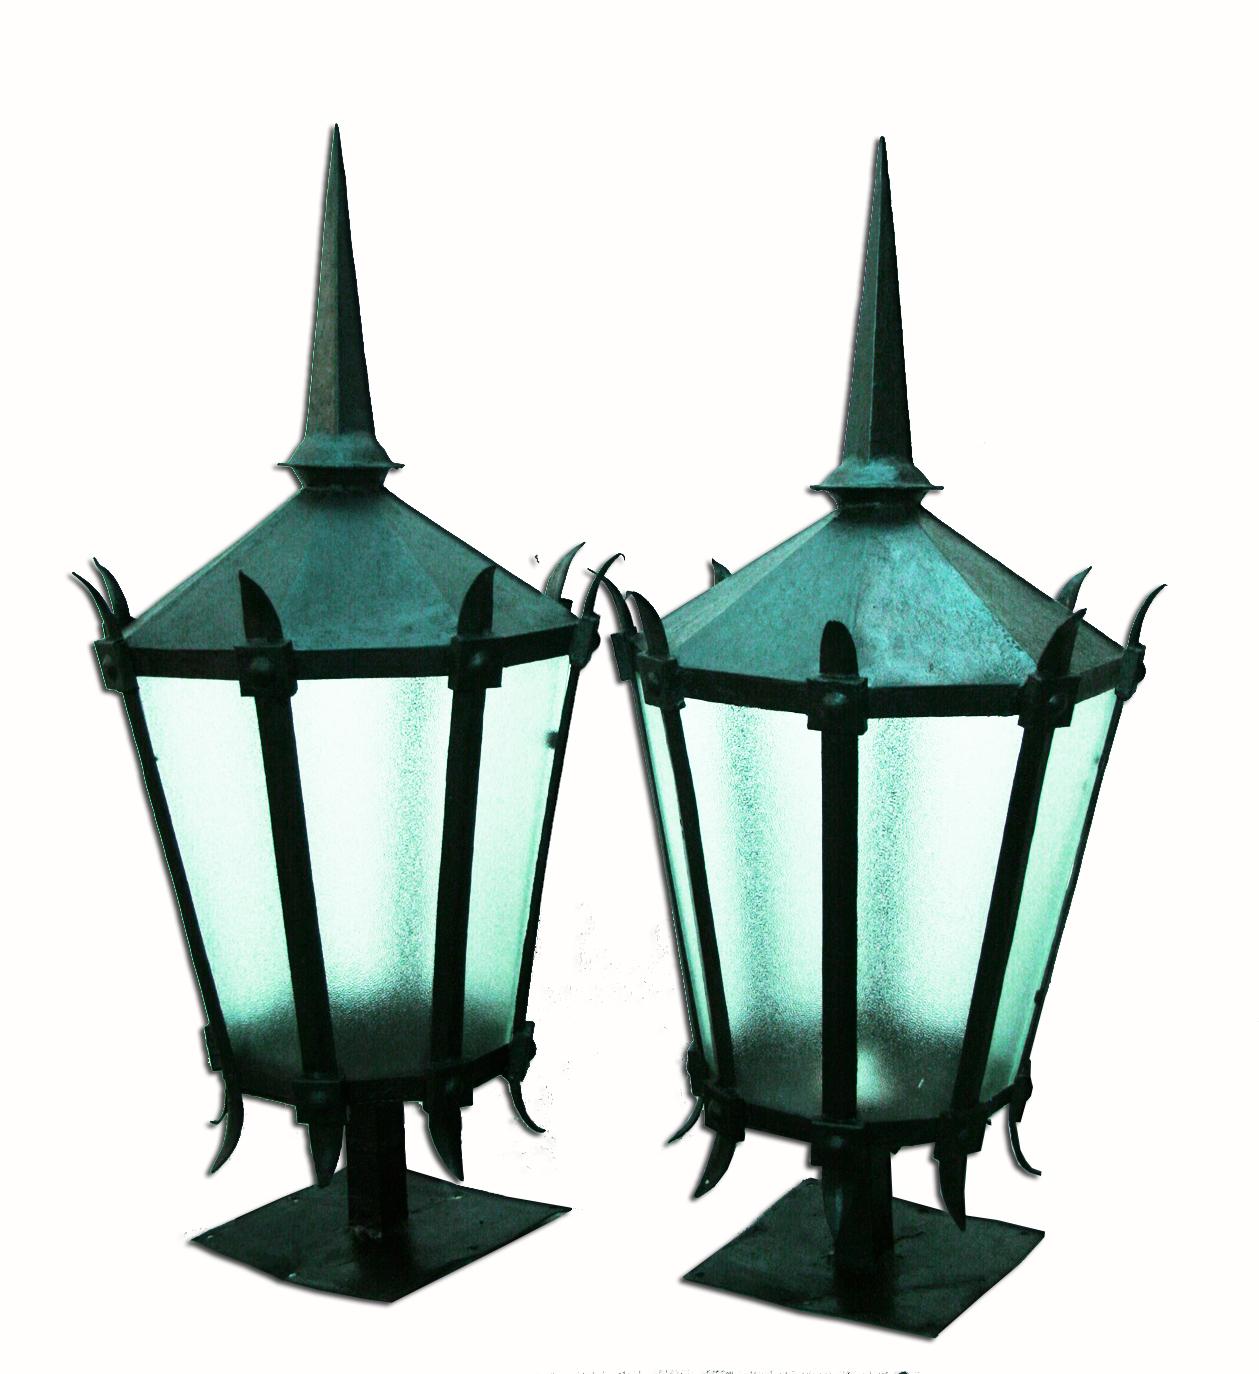 These lanterns of large dimensions were made by hand by a master craftsman for the door of some Italian villa throughout the 19th century or Early 20th Century

Nothing common. This decorative pair of outdoor lanterns, has a very attractive and